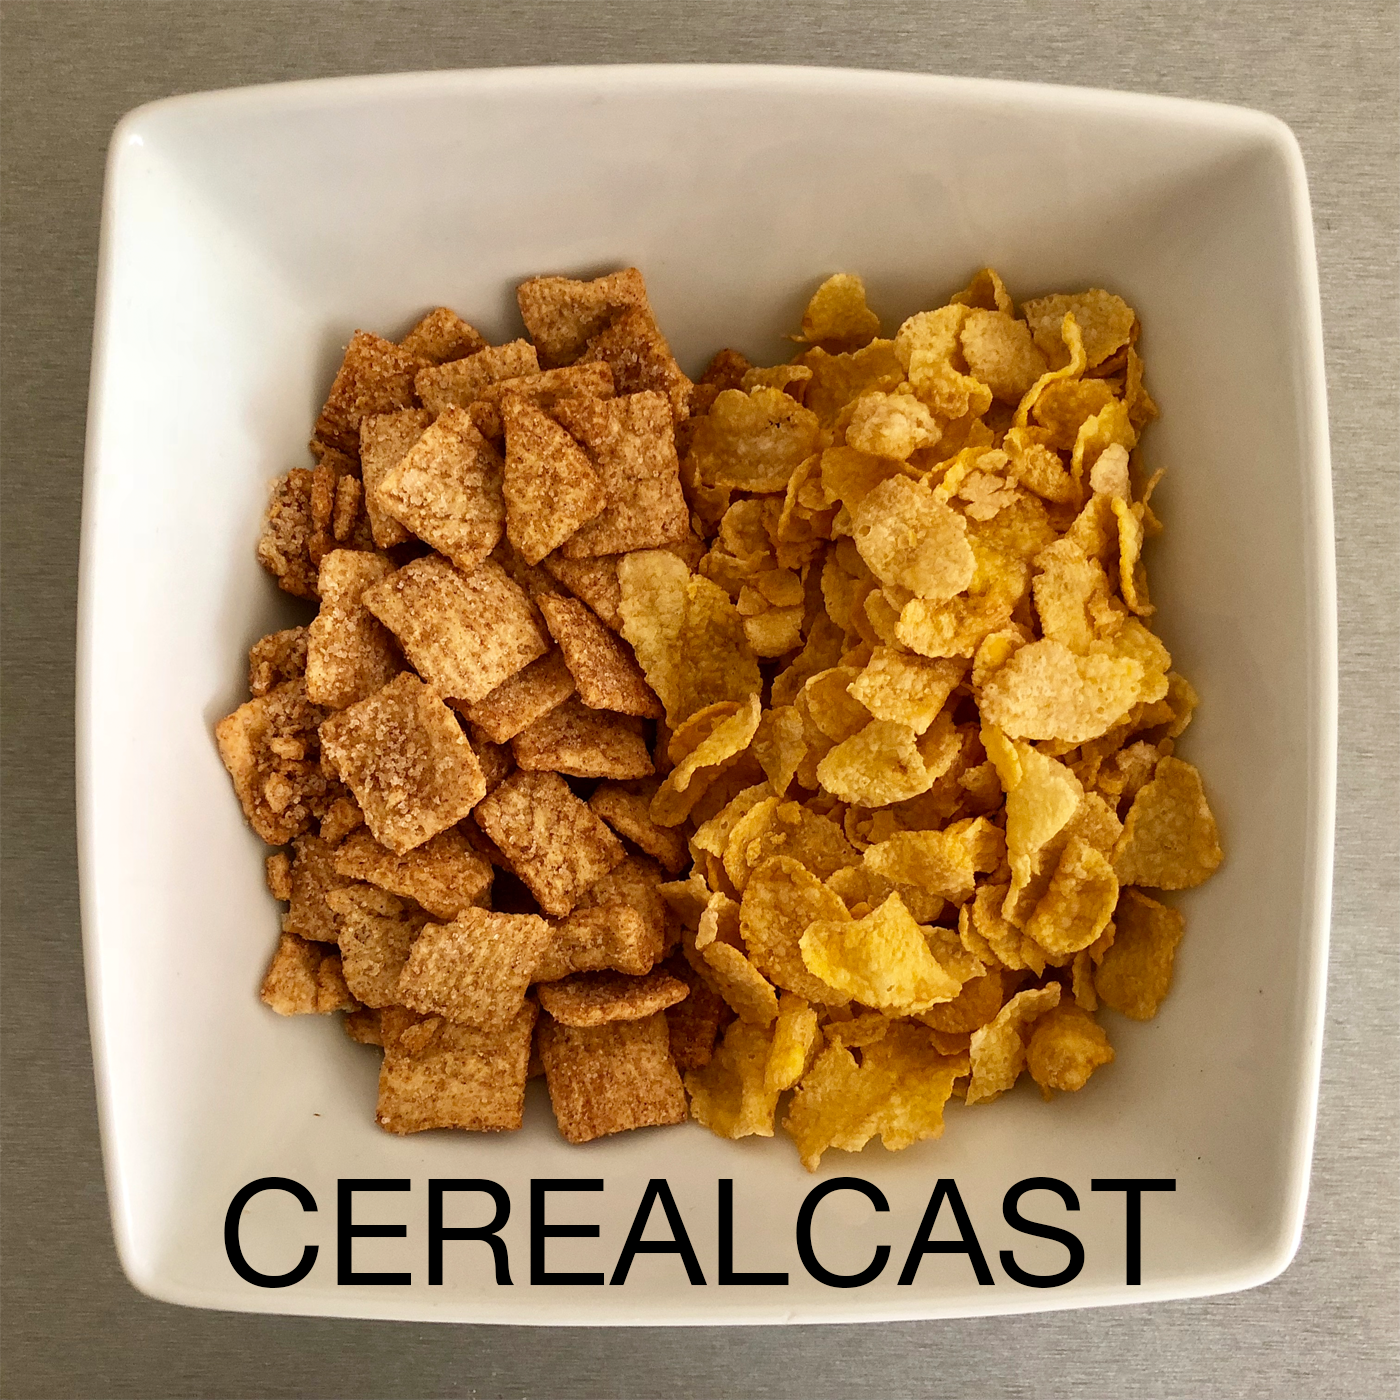 Cerealcast